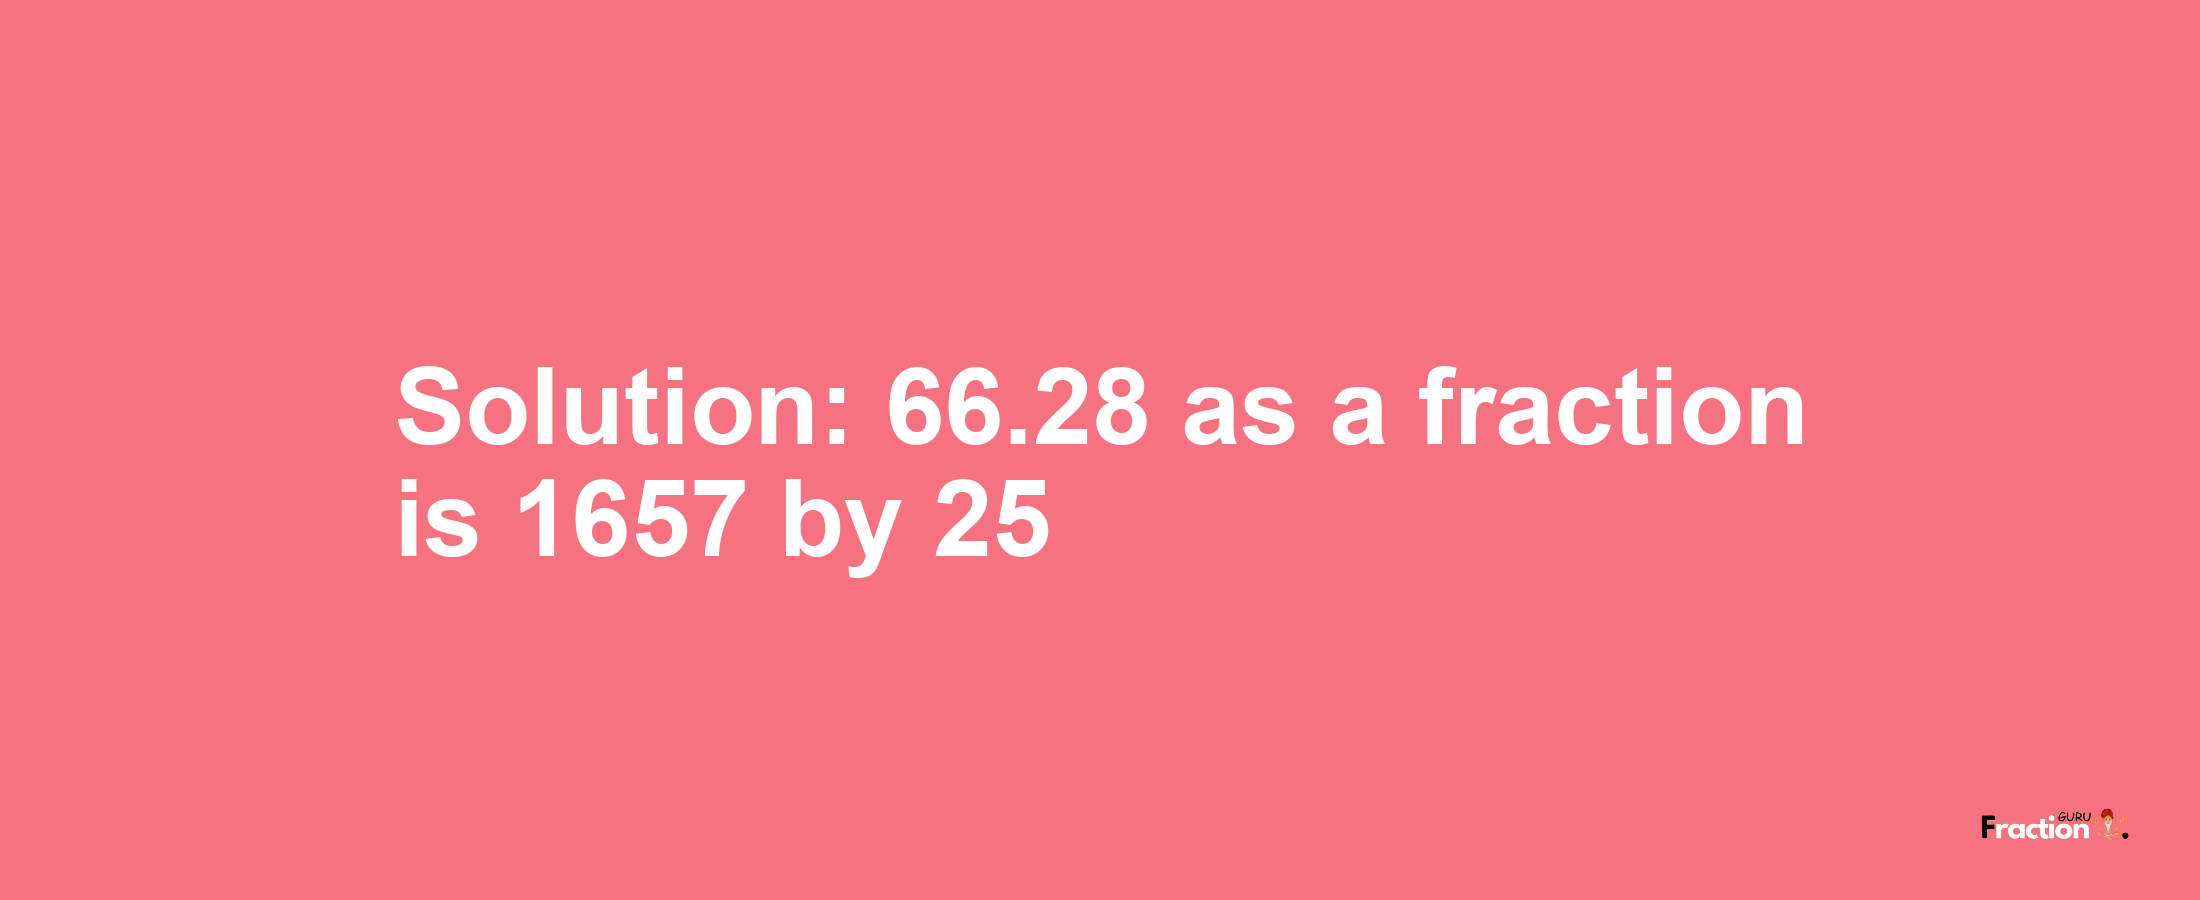 Solution:66.28 as a fraction is 1657/25